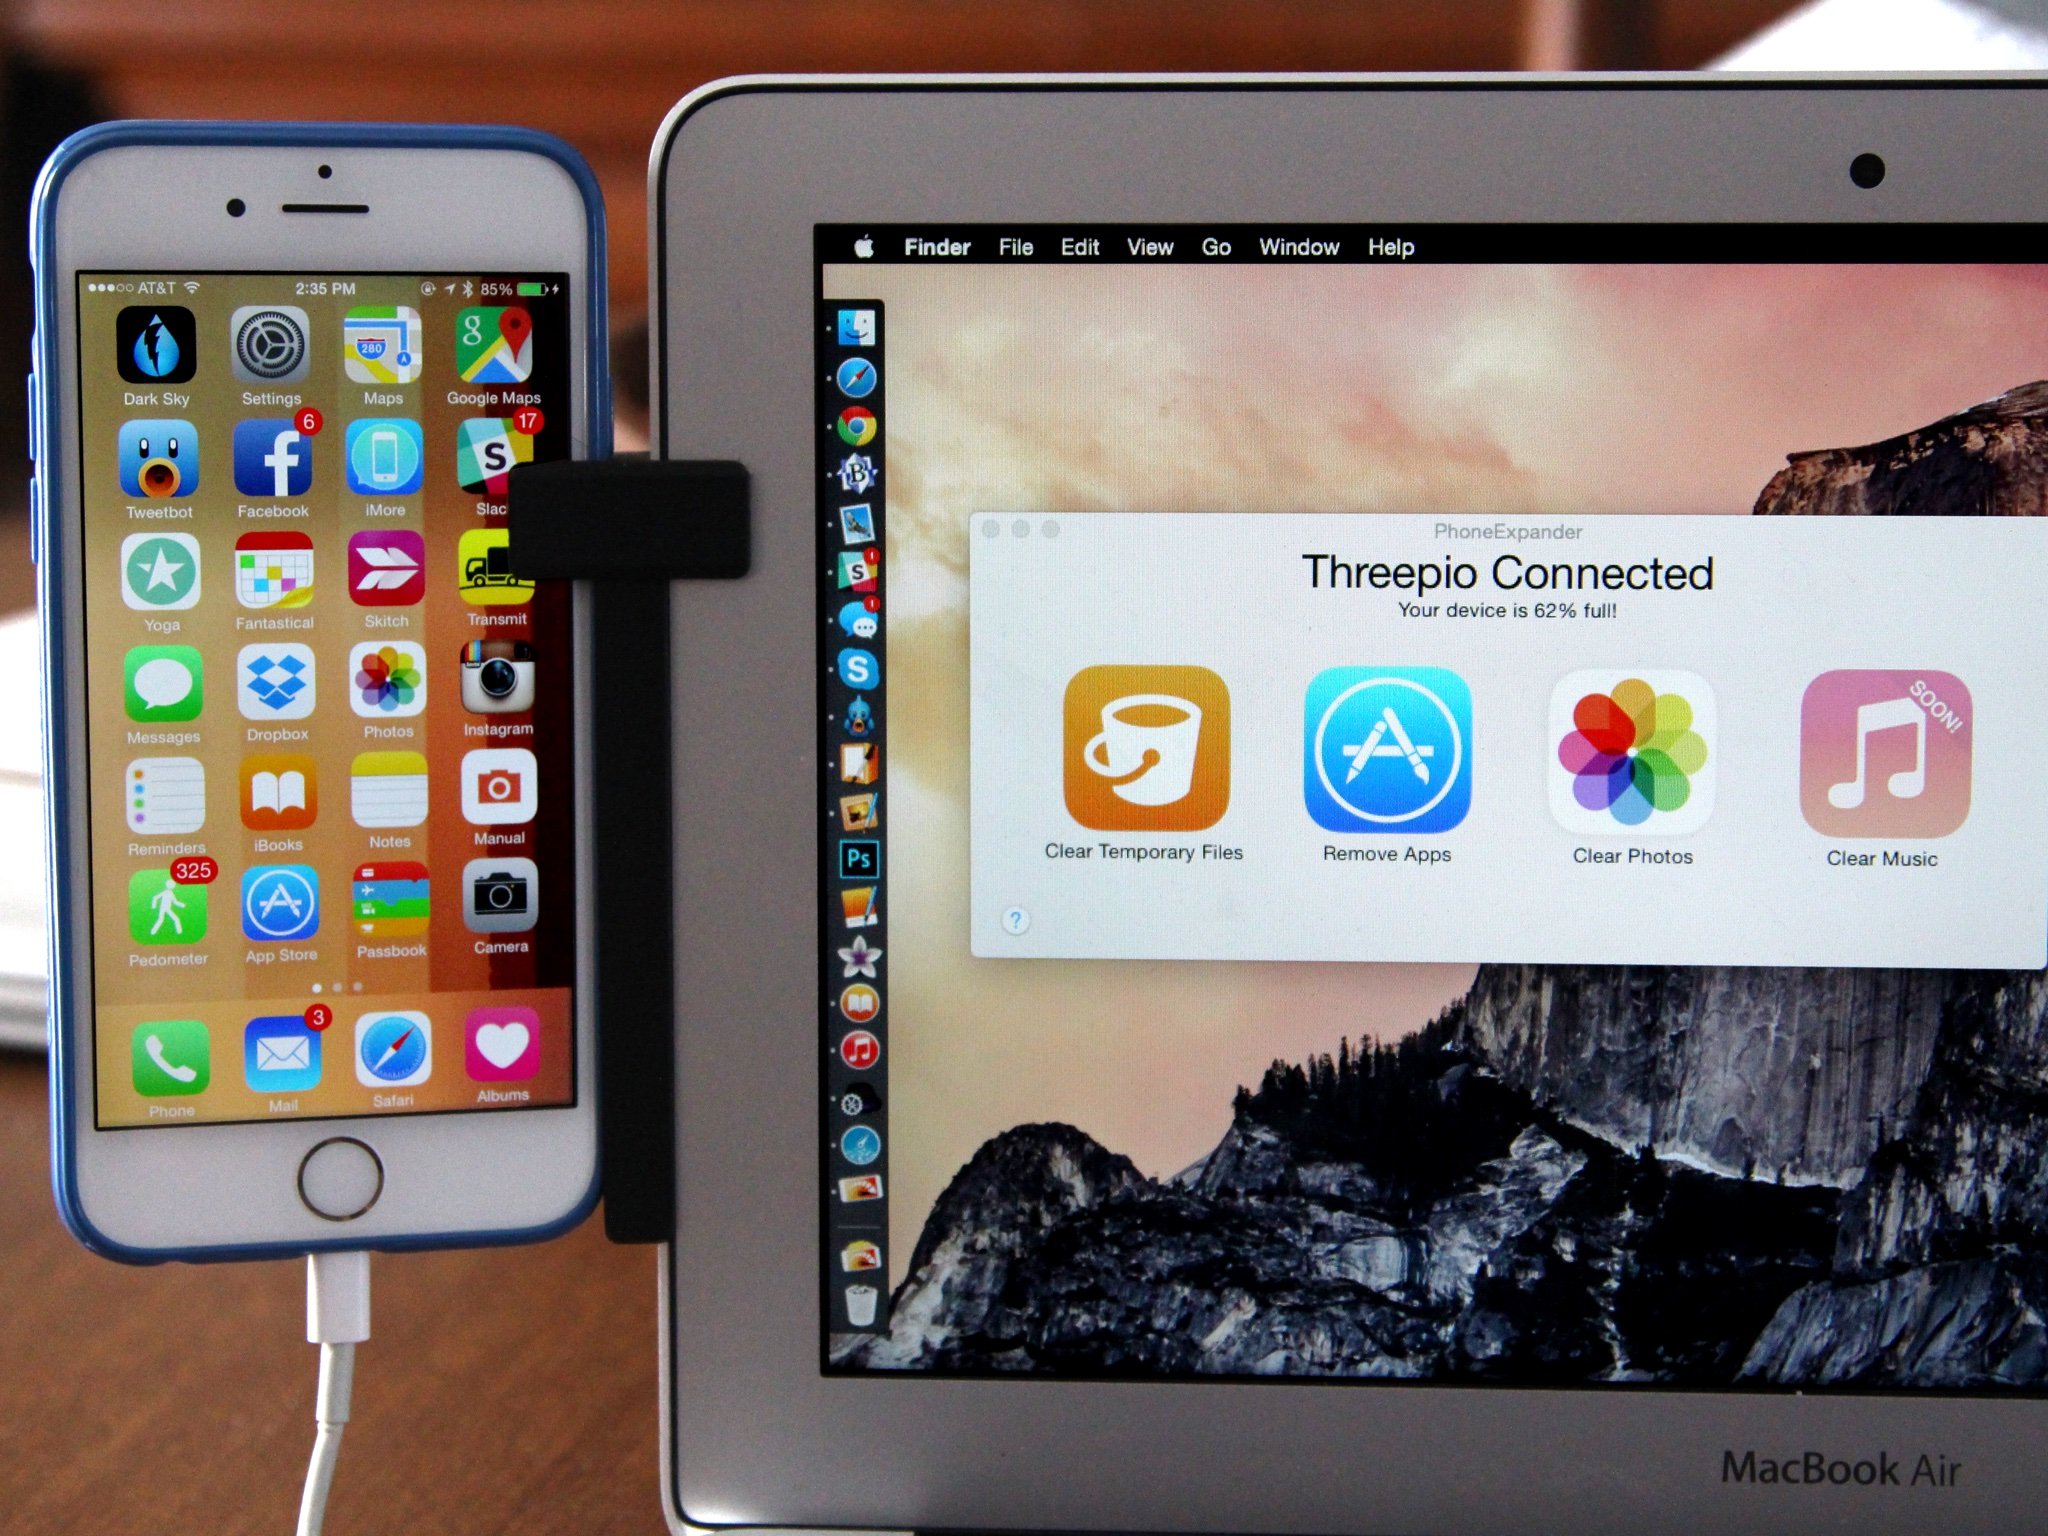 iPhone or iPad out of storage space? Clean it up with the